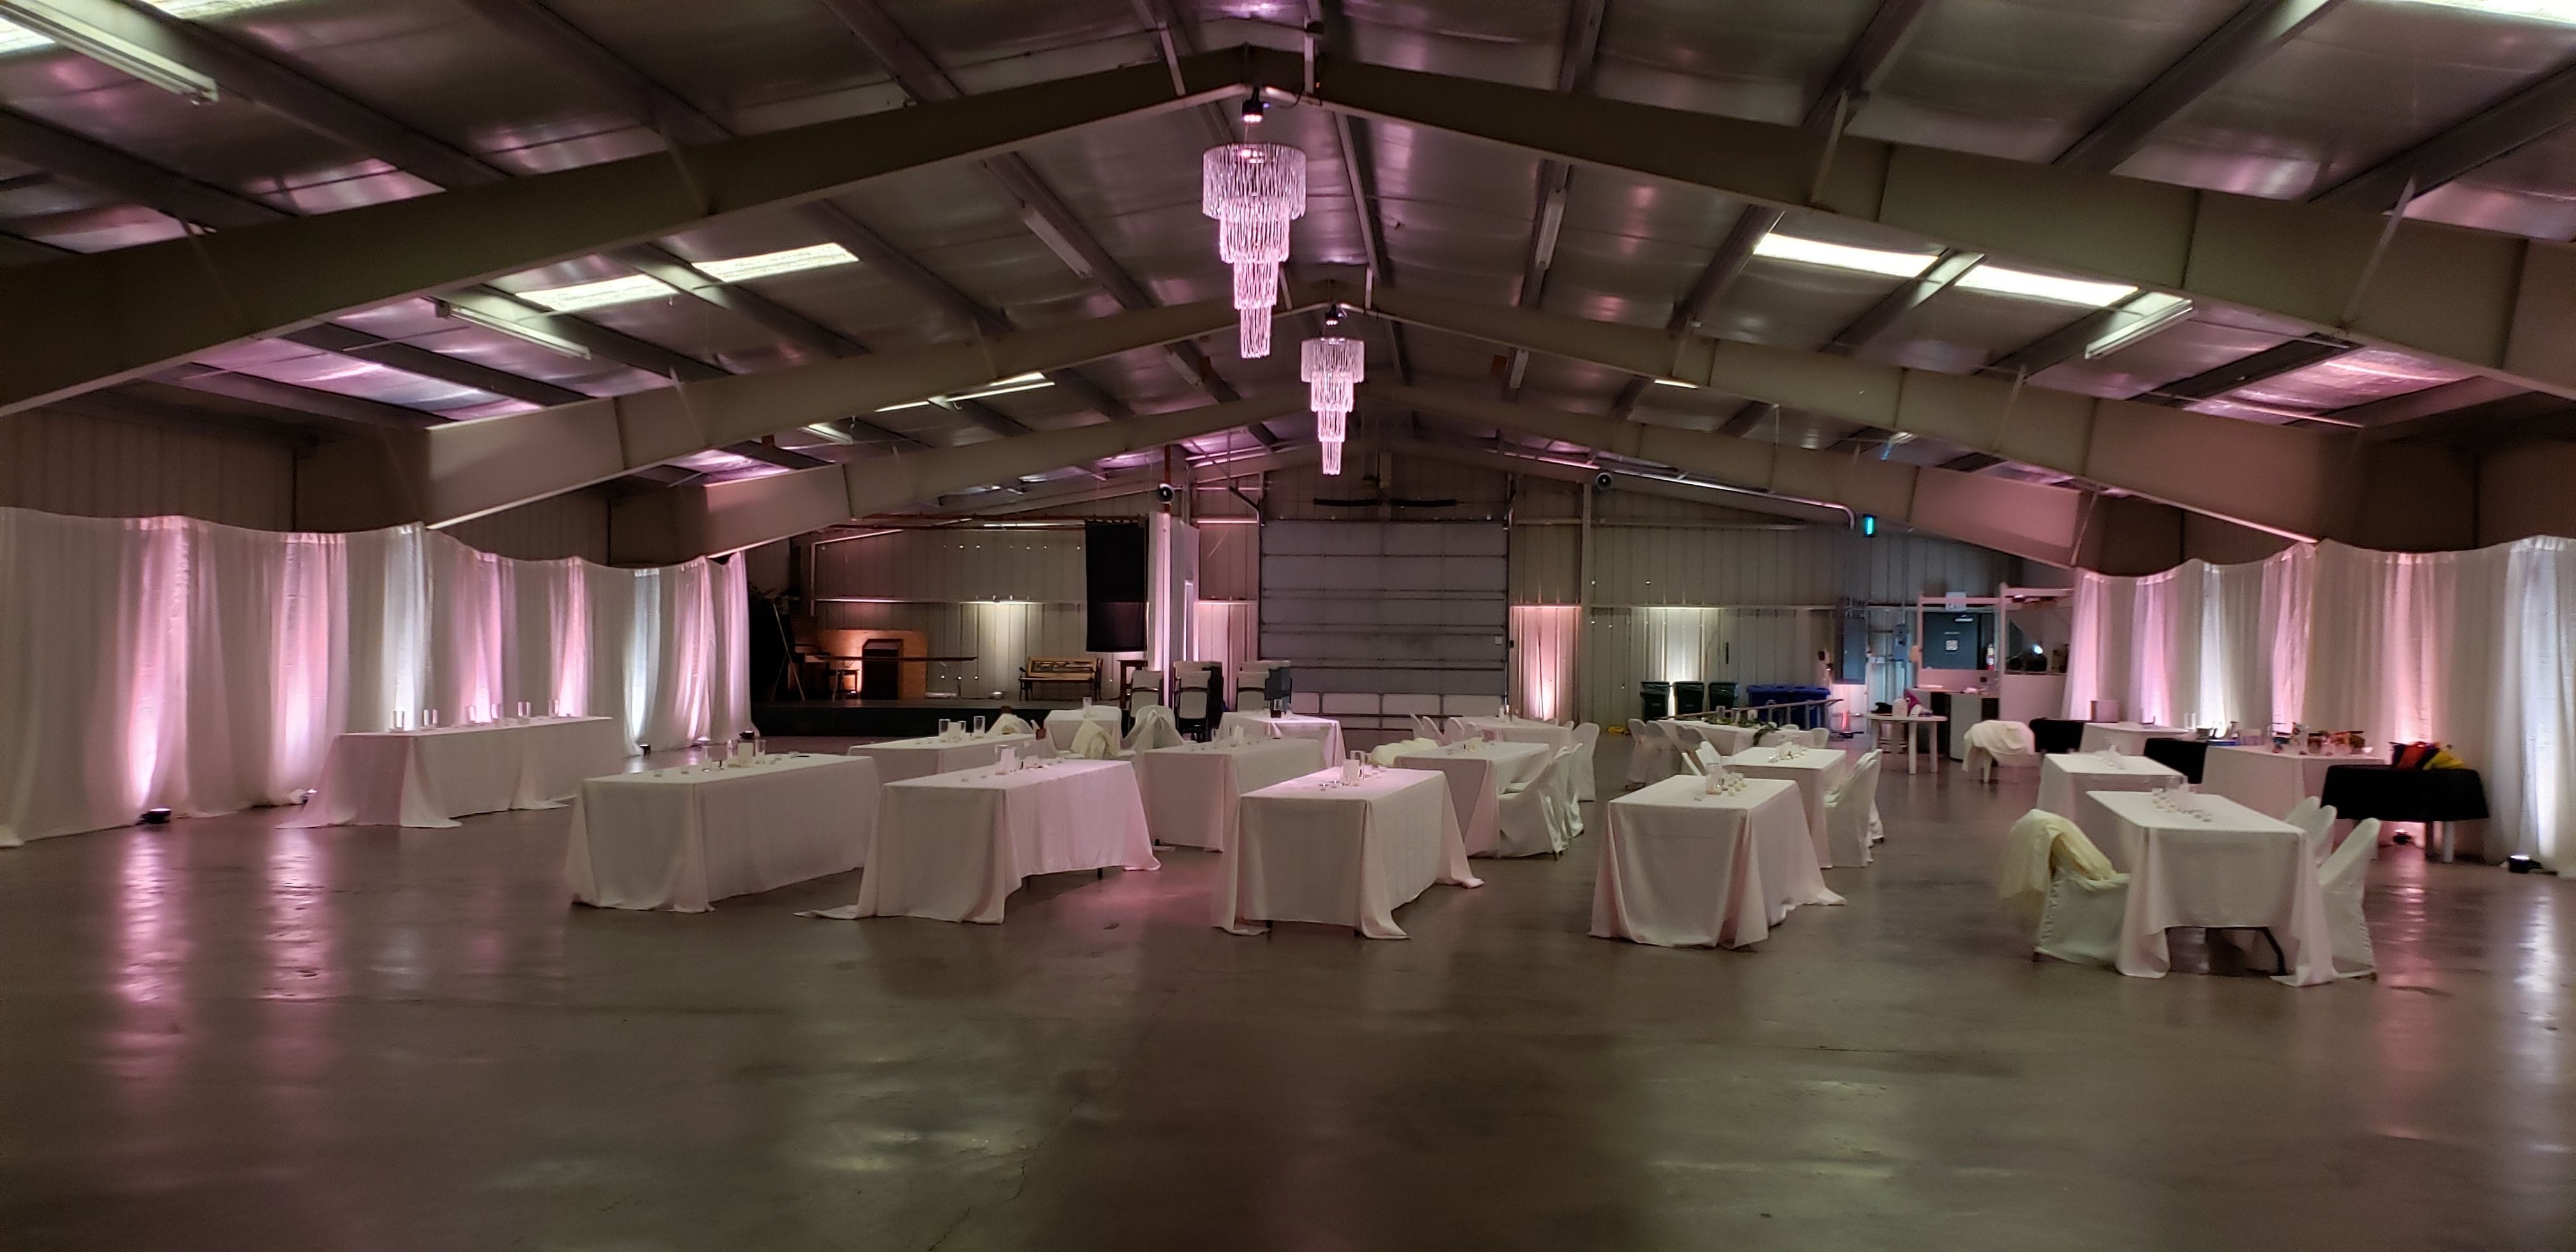 Wedding with blush pink and soft white up lighting and chandeliersby Duluth Event Lighting. at the Lake County Fairgrounds.